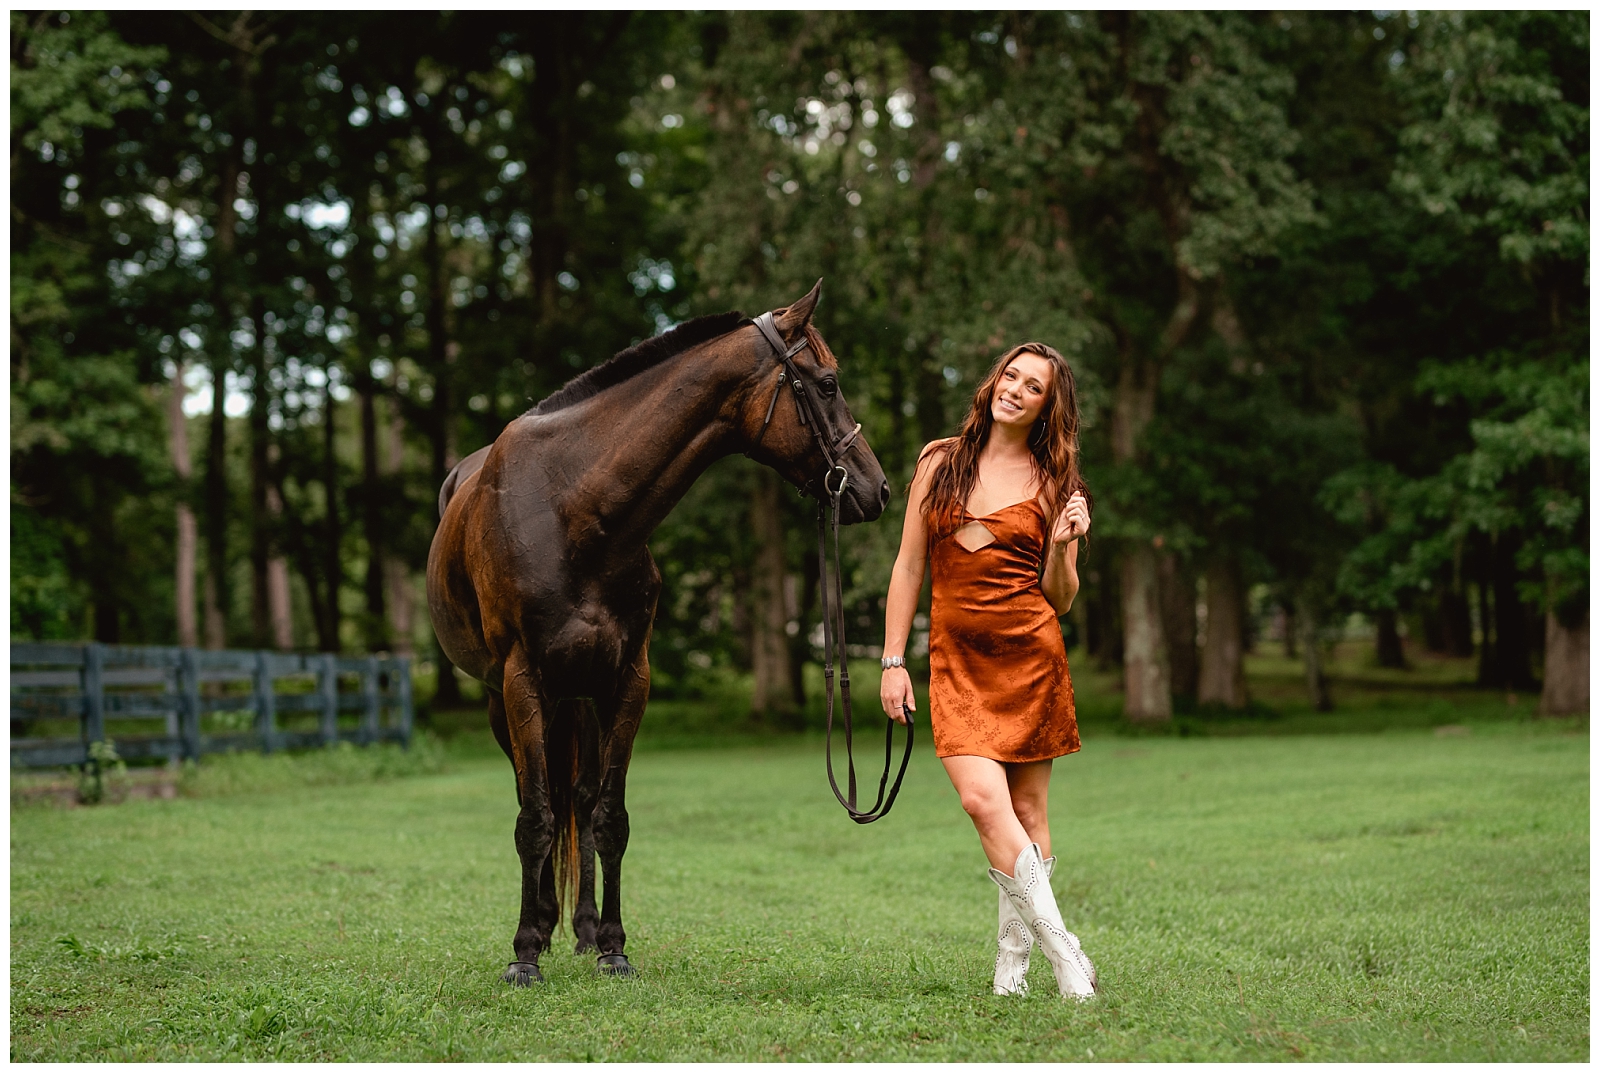 Professional equine photographer in Tallahassee, Florida specializing in horse and rider photoshoots.